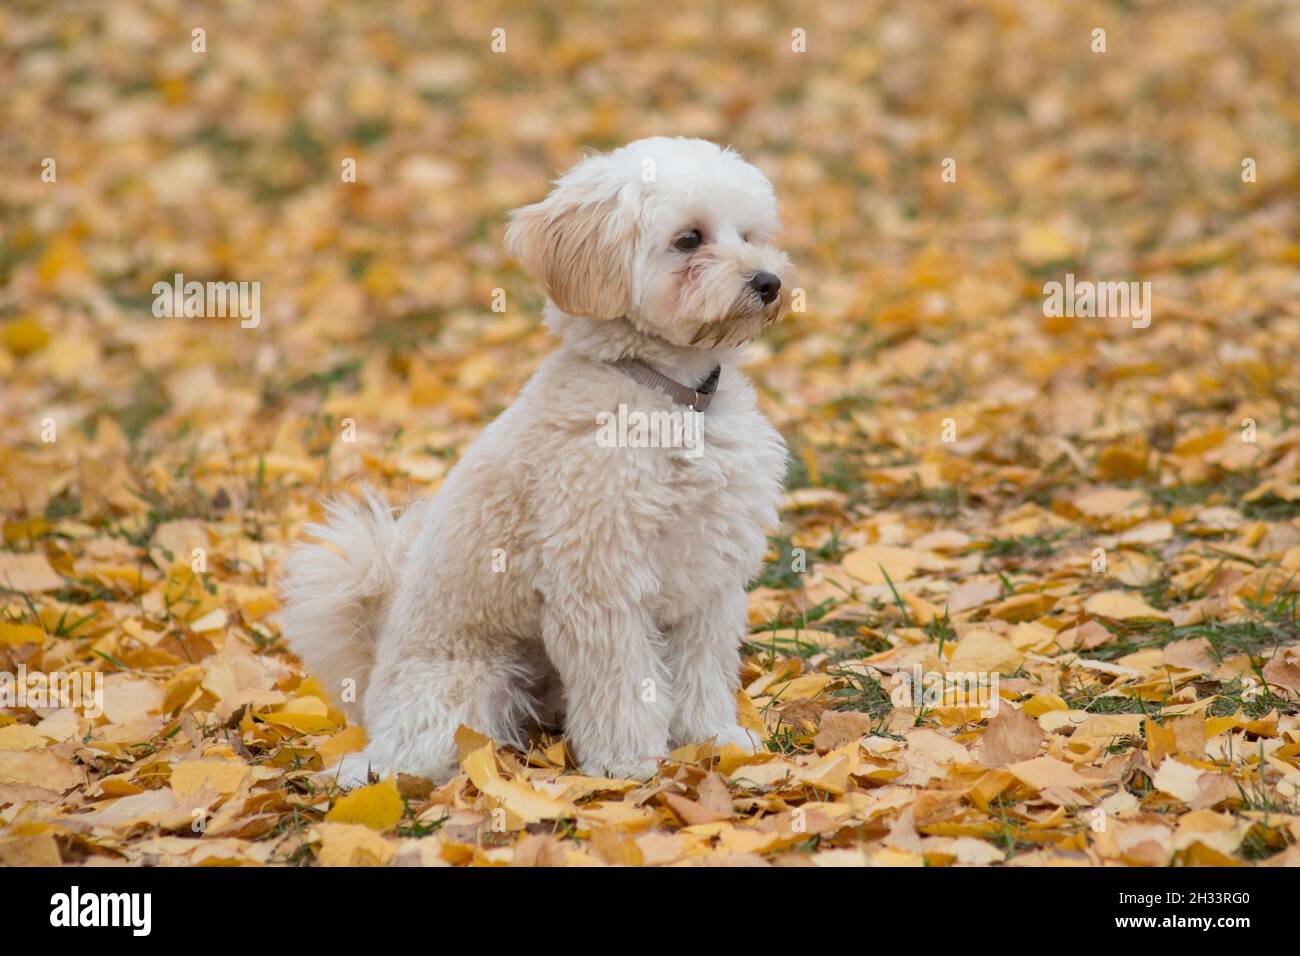 Cute maltepoo puppy is siting on a yellow foliage in the autumn park. Mix of the breeds maltese and poodle. Pet animals. Purebred dog. Stock Photo